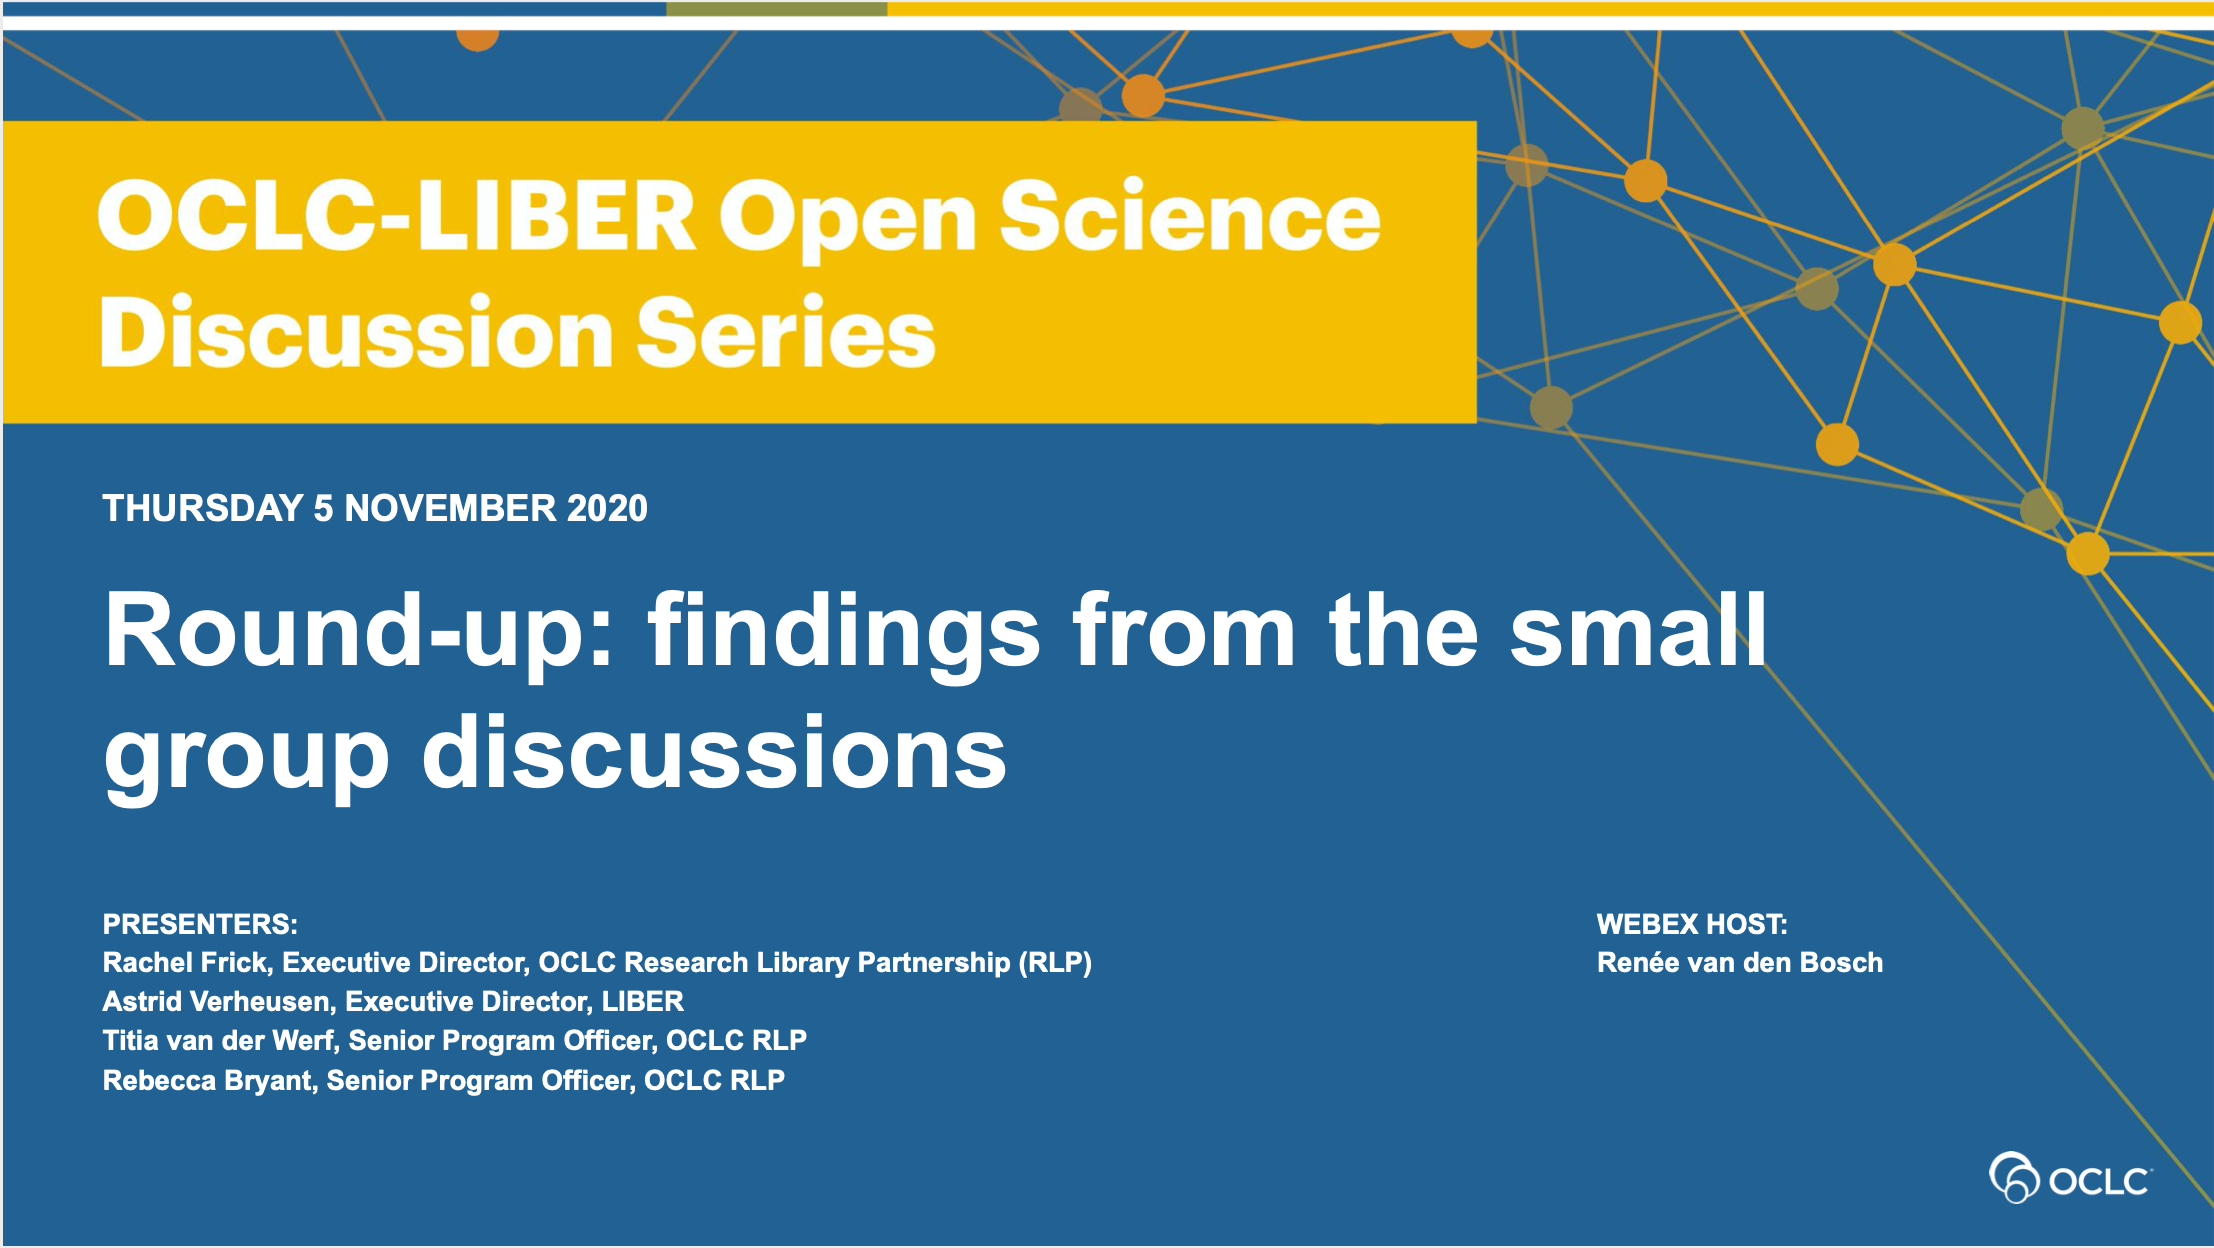 Round up, OCLC-LIBER Open Science Discussion Series